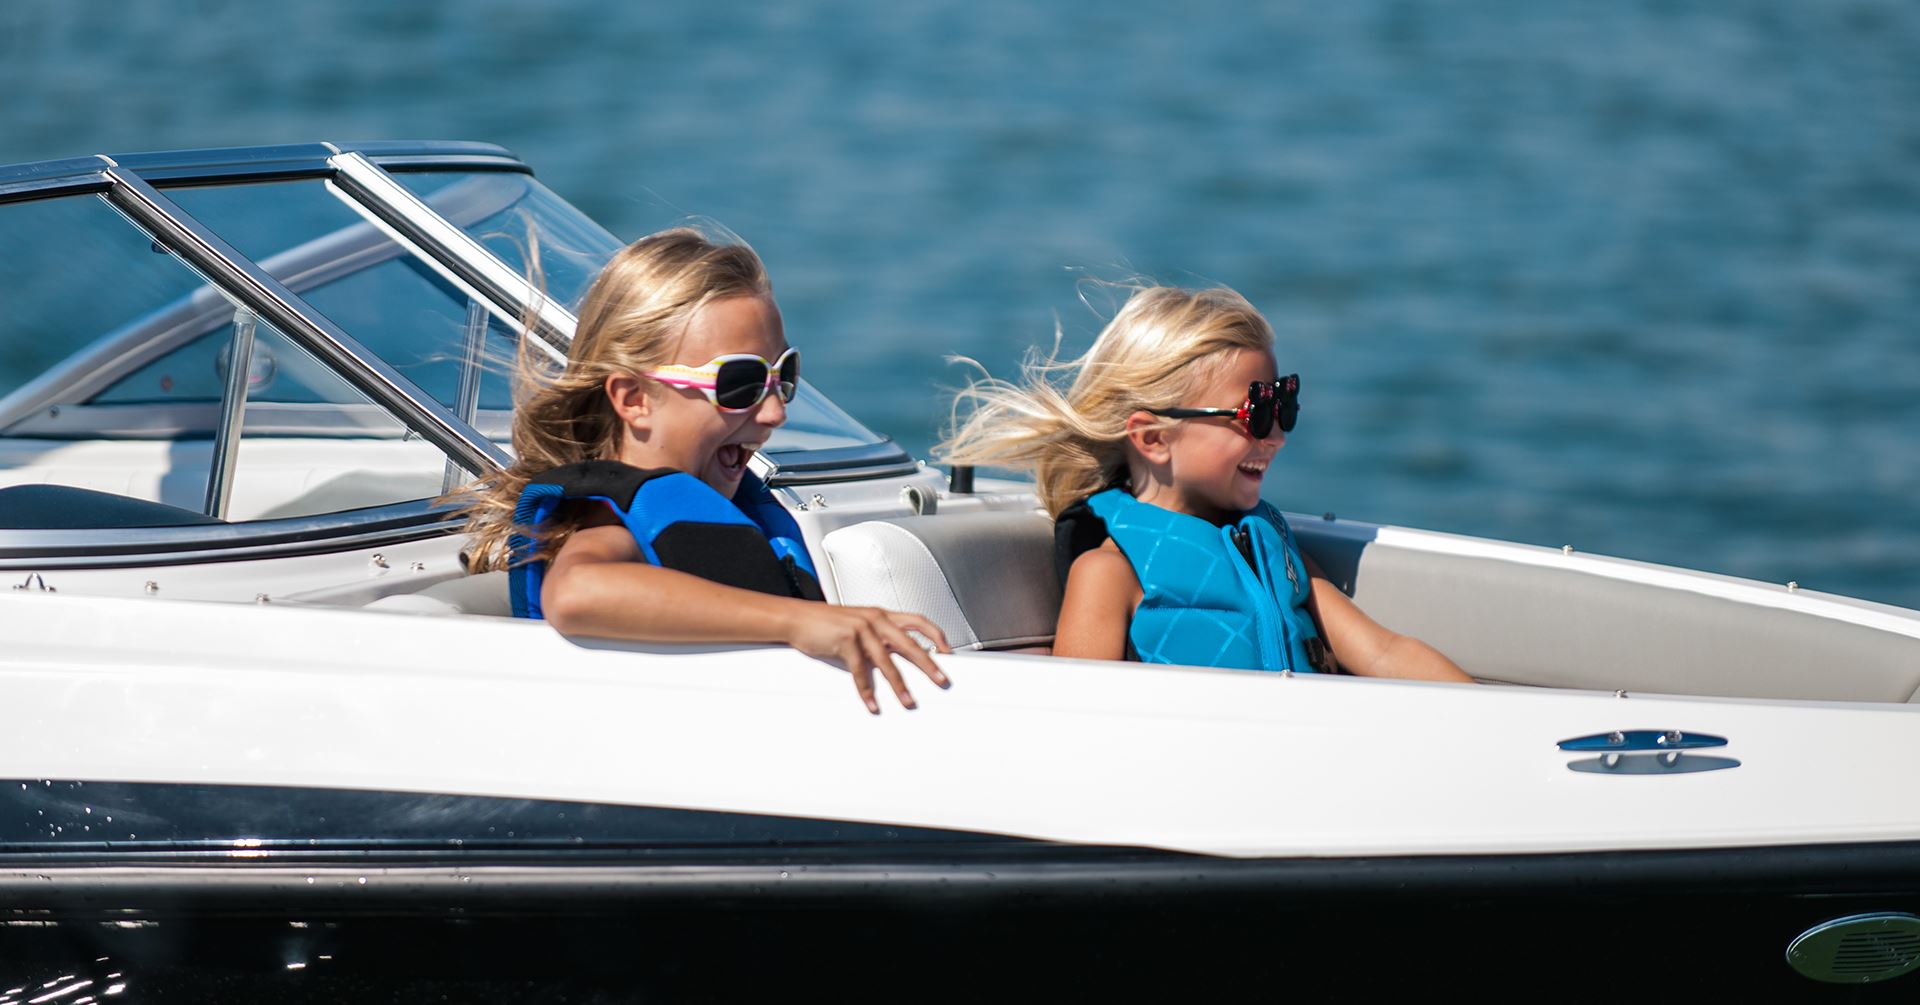 kids in boating fb event1